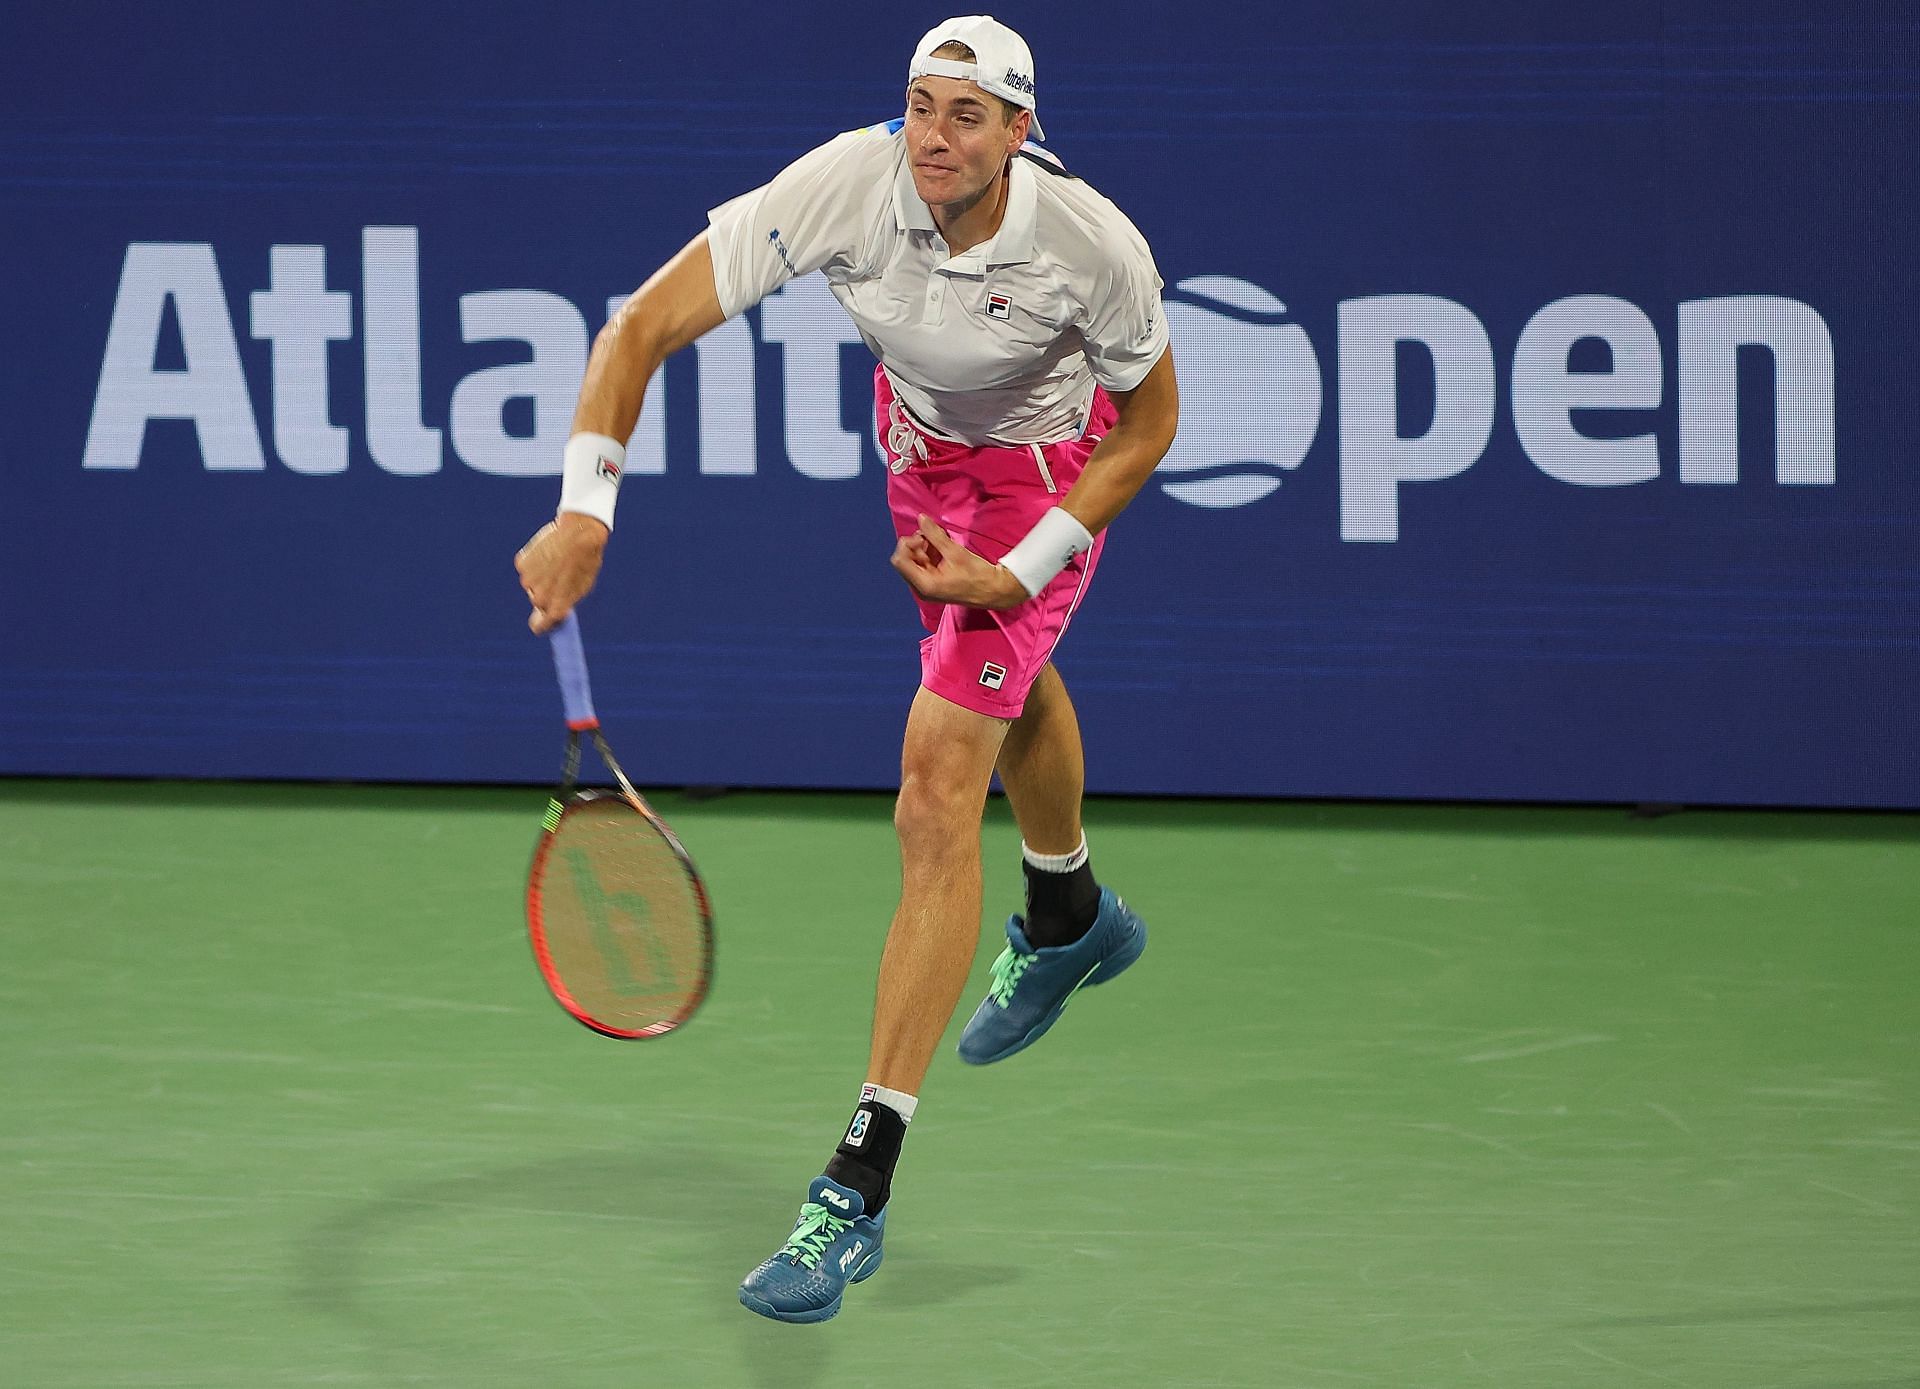 John Isner booked his place in the quarterfinals of the Atlanta Open